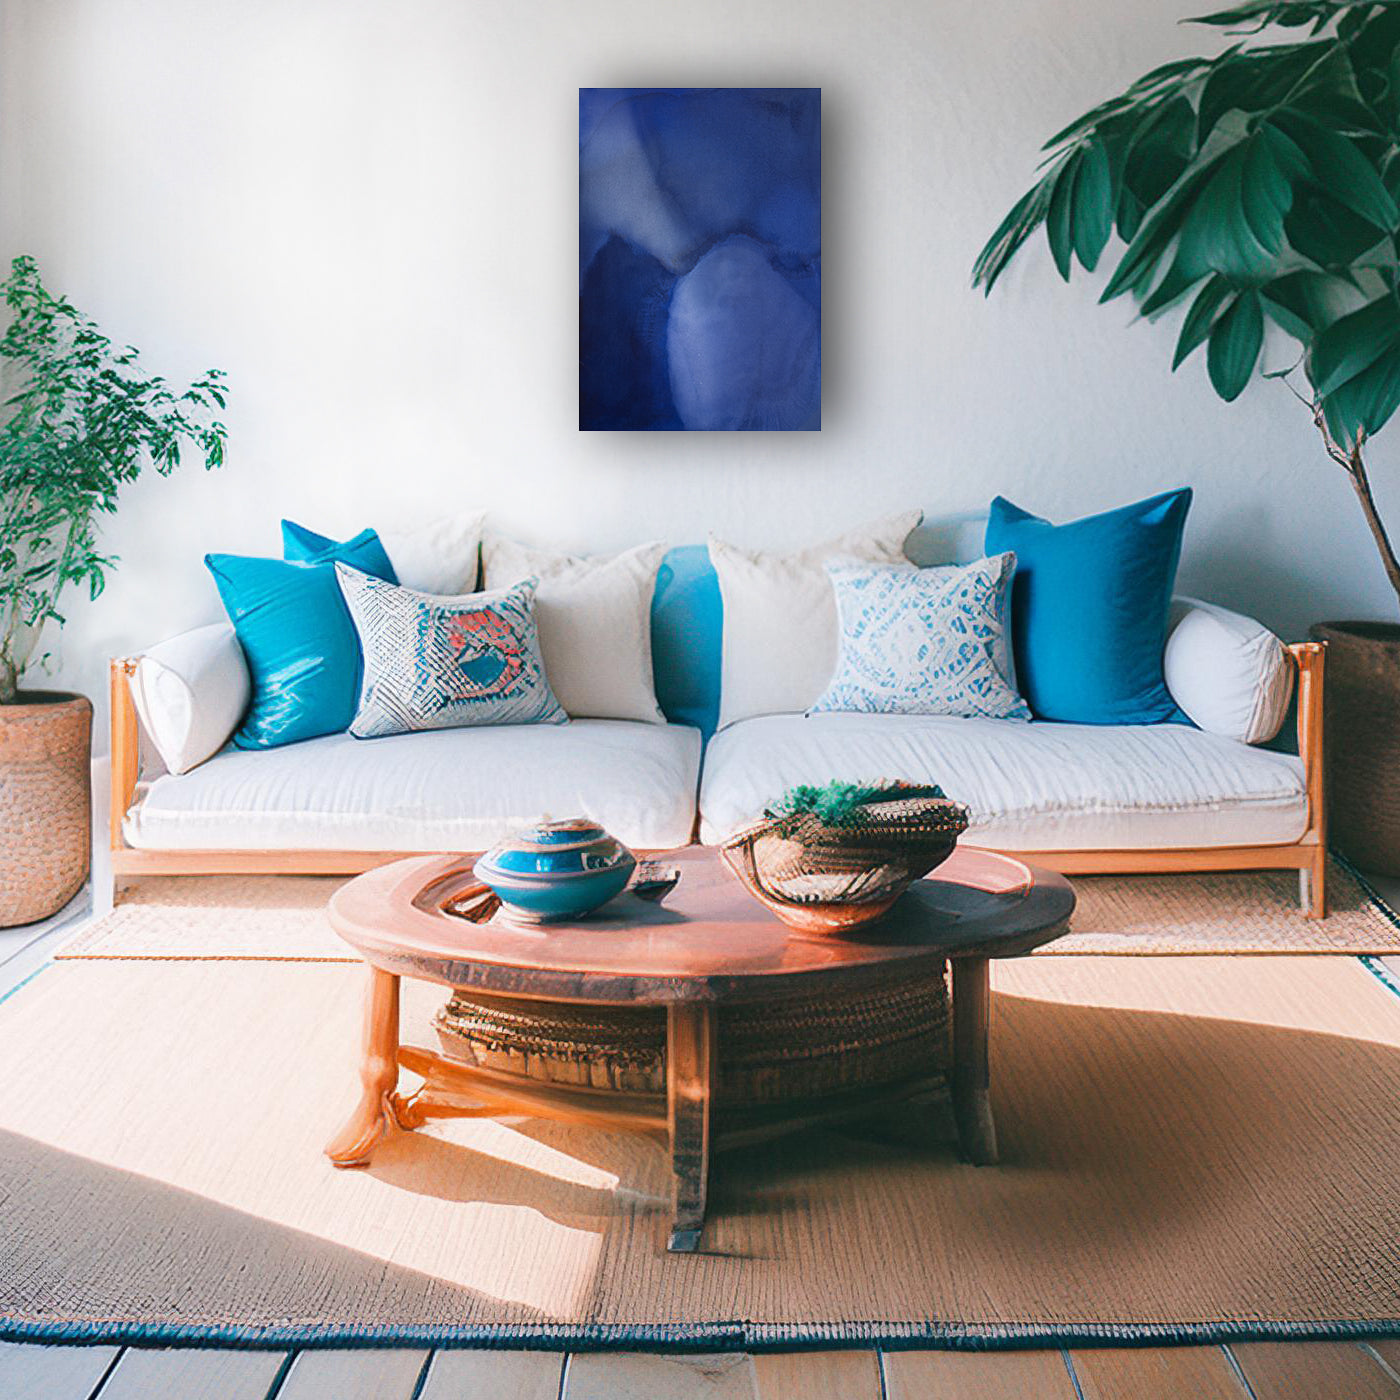 A blue abstract painting hangs above a white couch covered in white and blue cushions